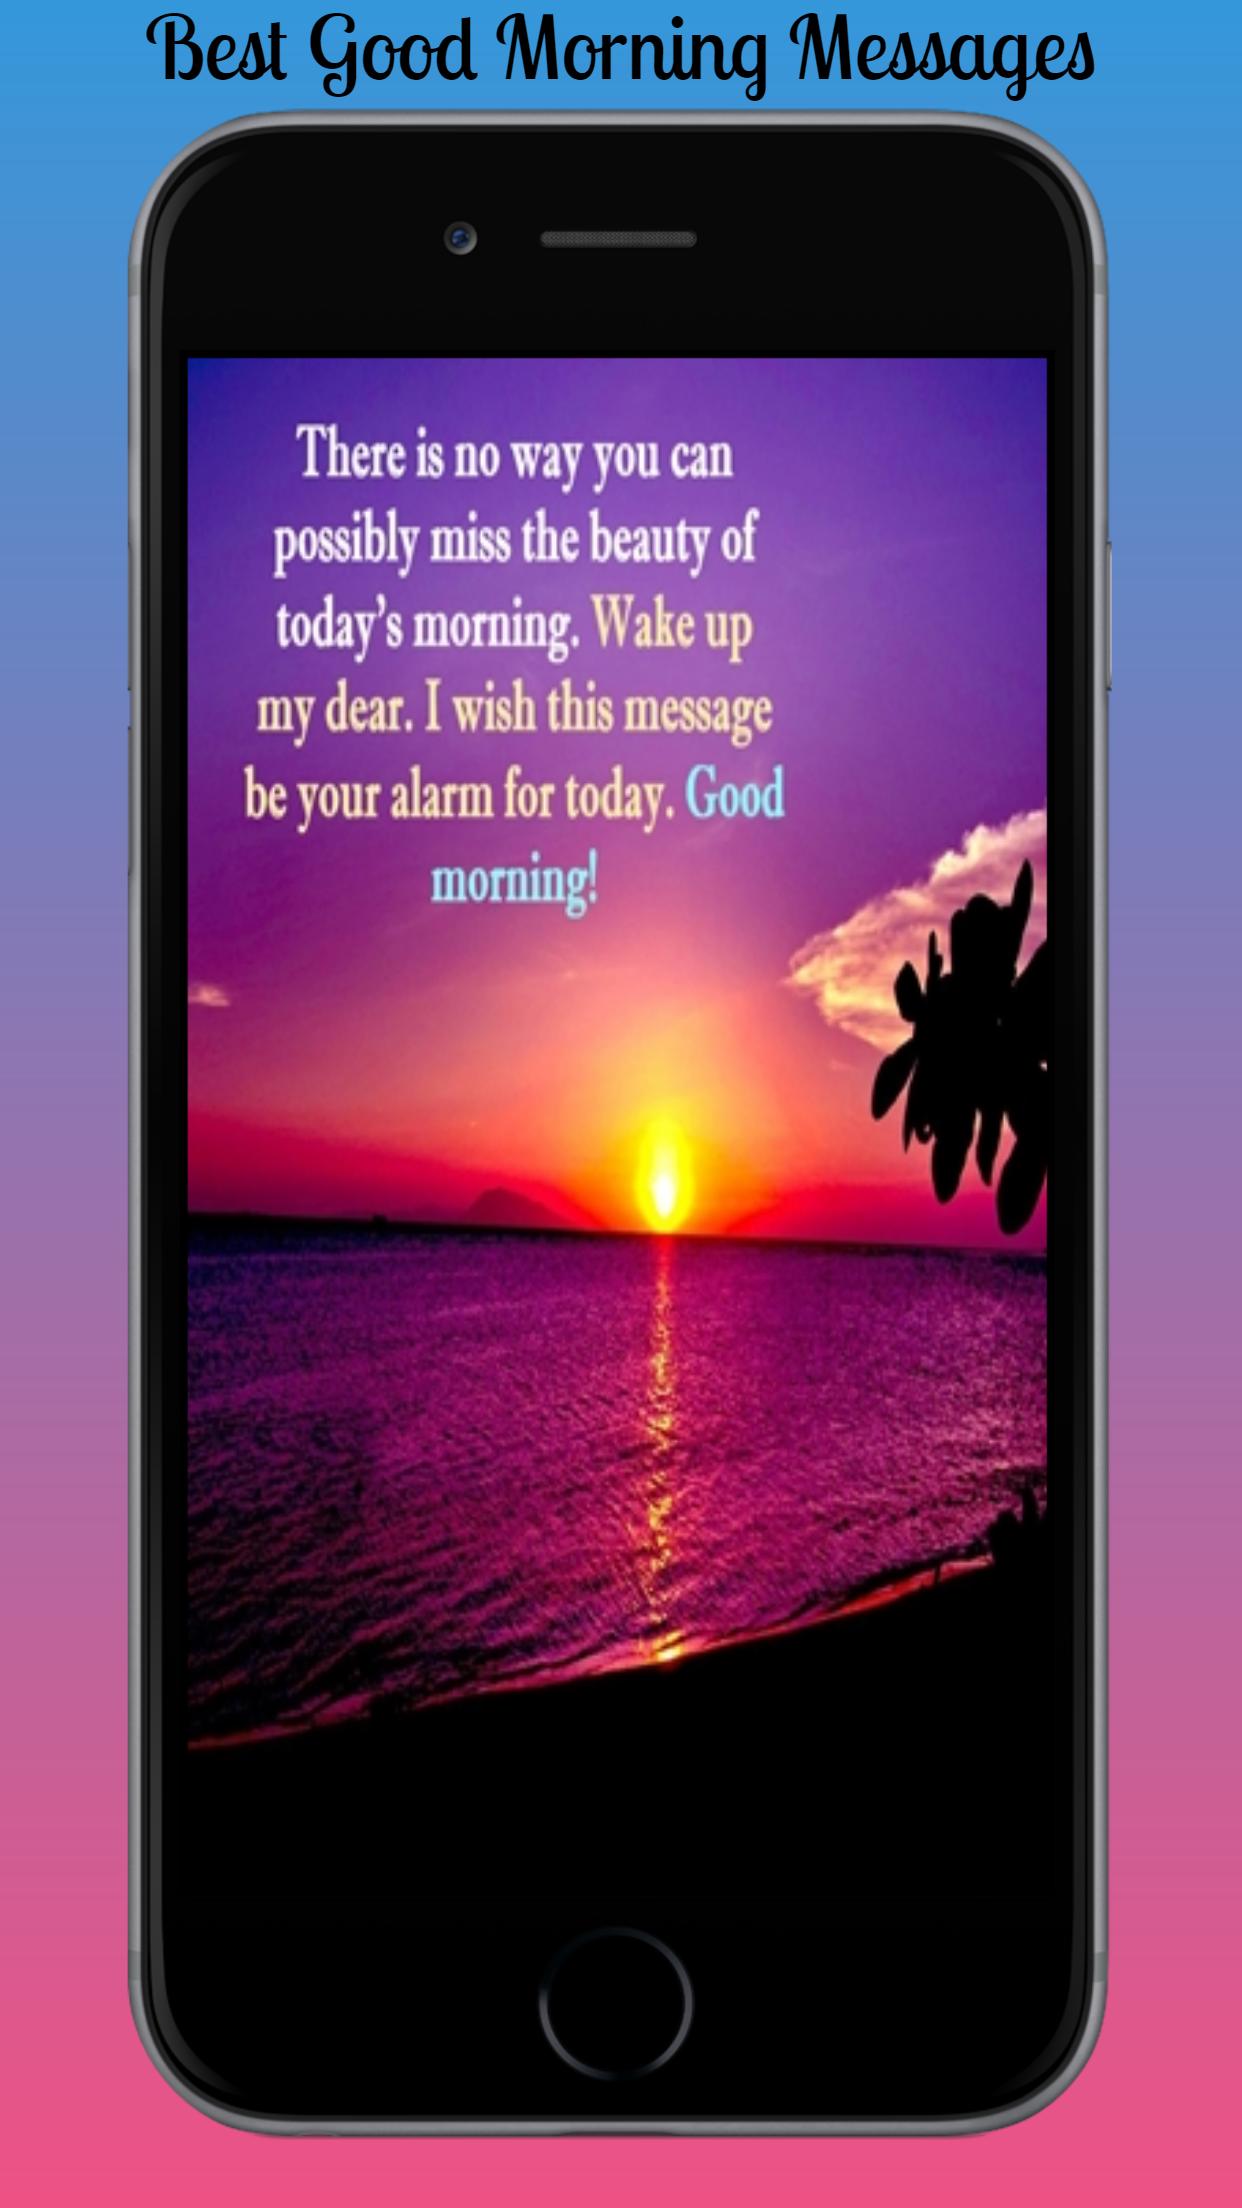 Inspirational Good Morning Messages,Wishes&Quotes 2.0 Screenshot 4